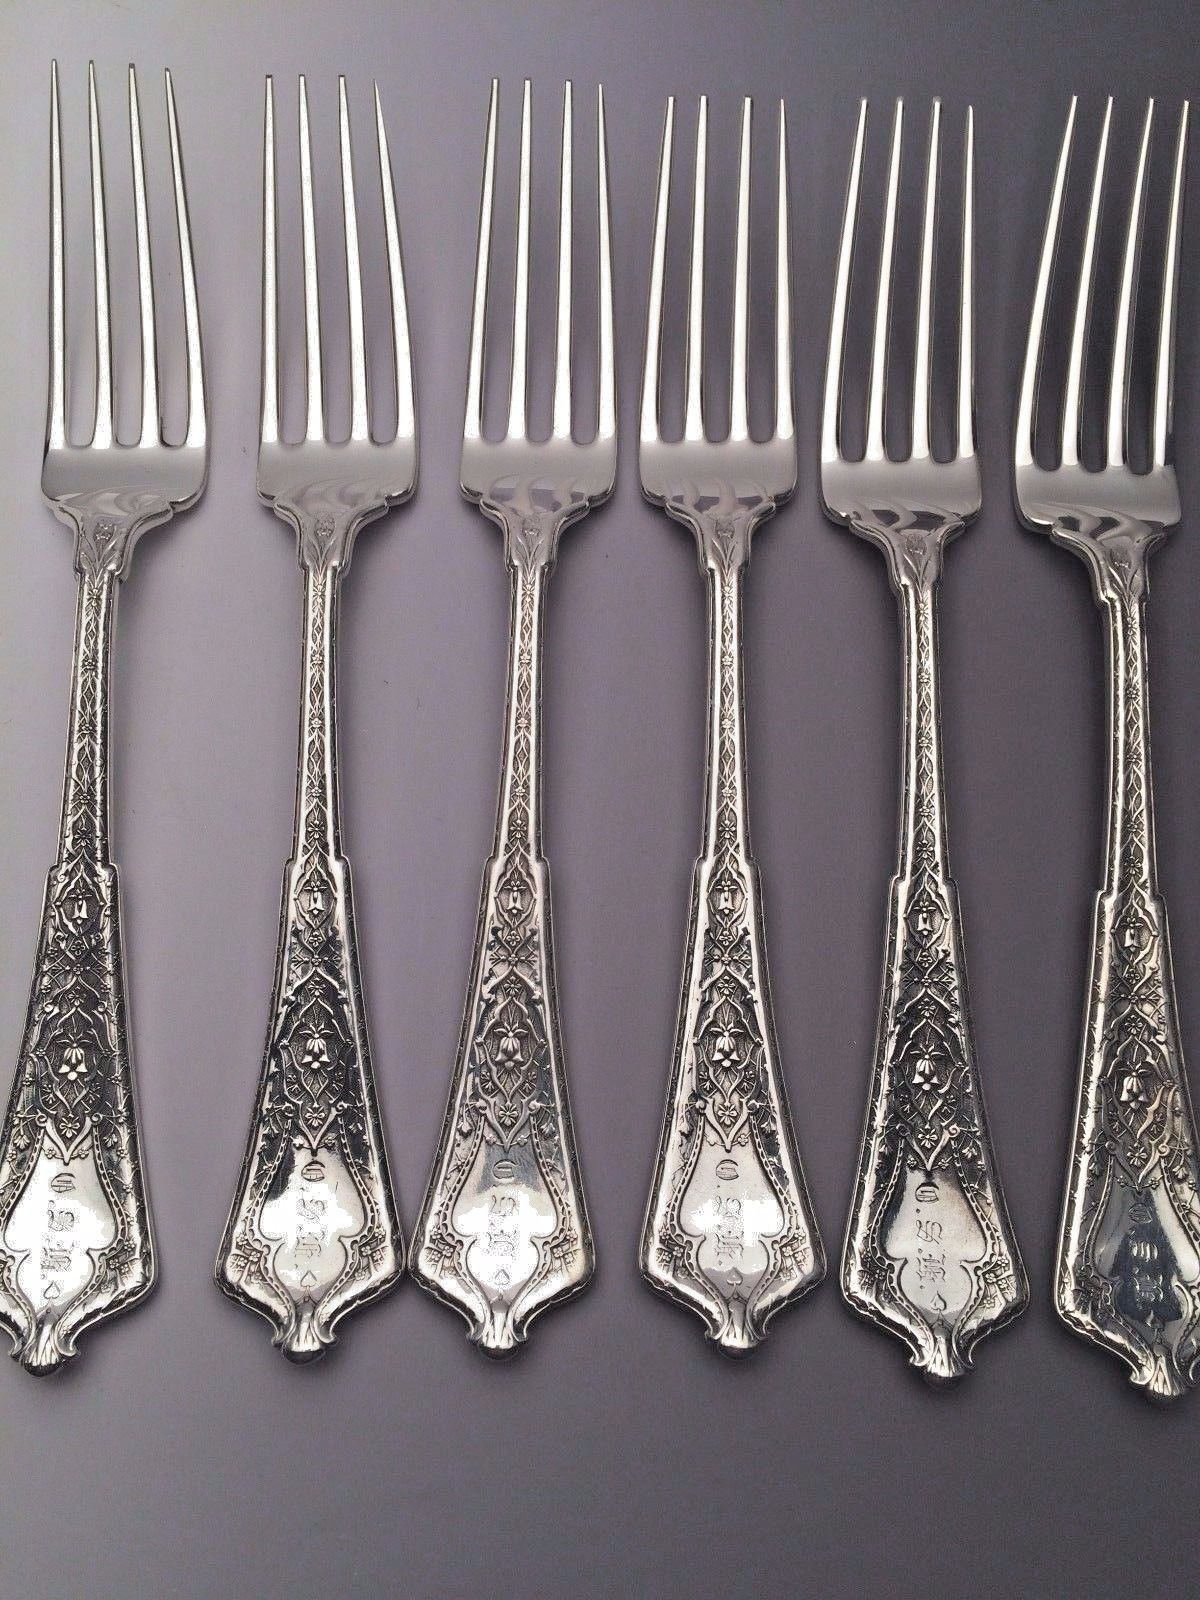 Persian by Tiffany & Co. Sterling Silver group of 6 Dinner Forks